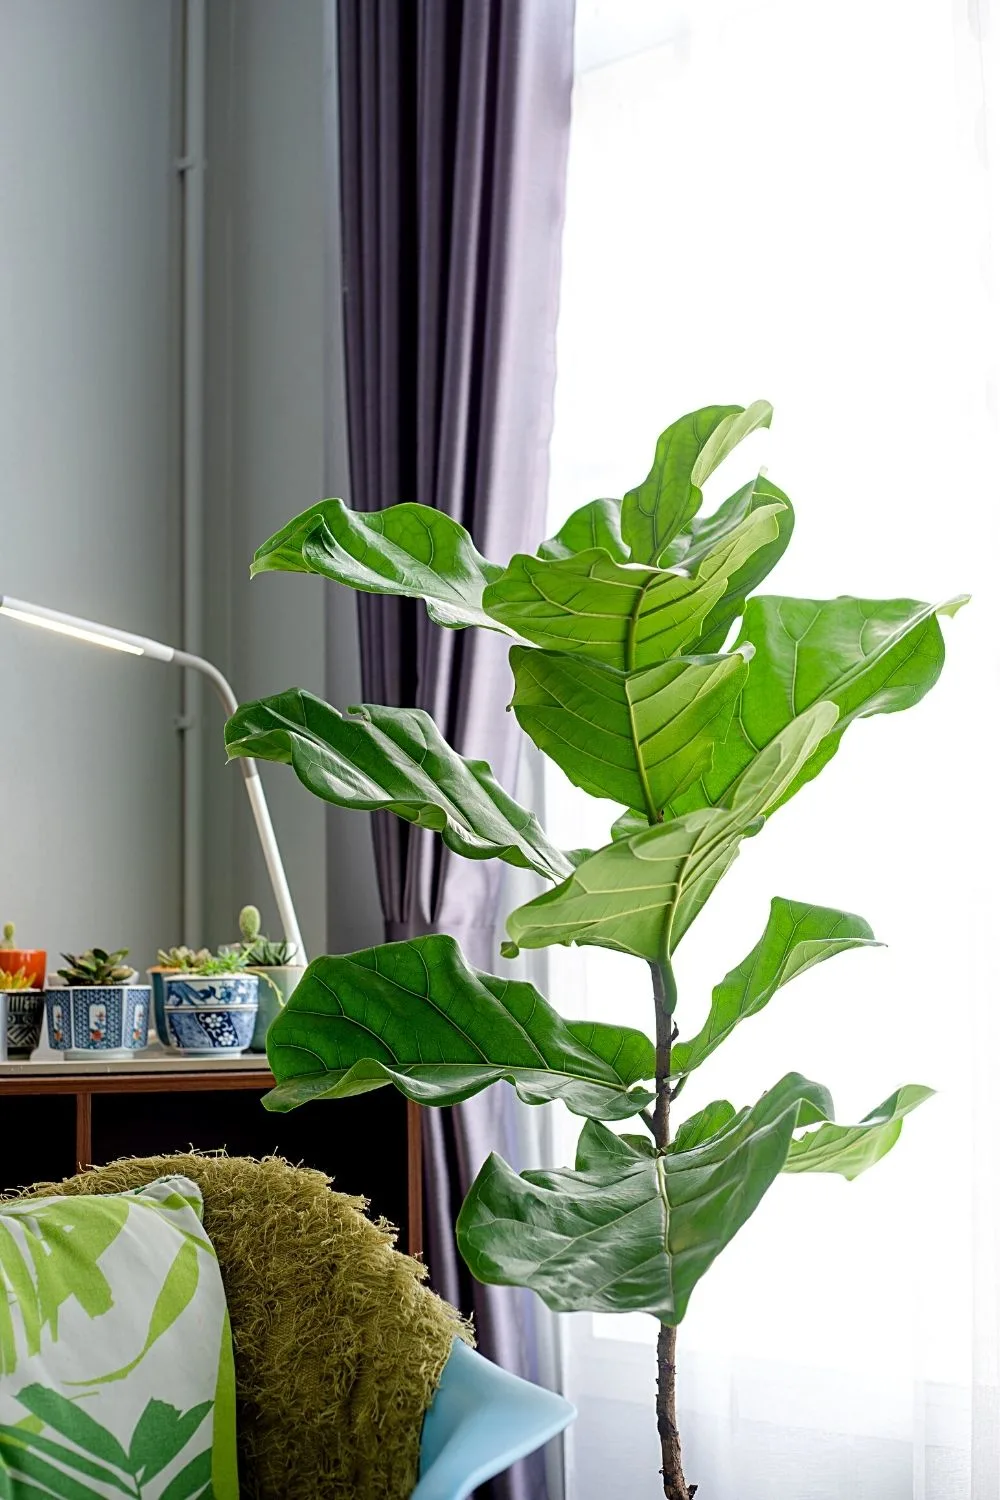 Despite its finicky growing needs, you can place Fiddle Leaf Fig near a southwest-facing window to make it thrive